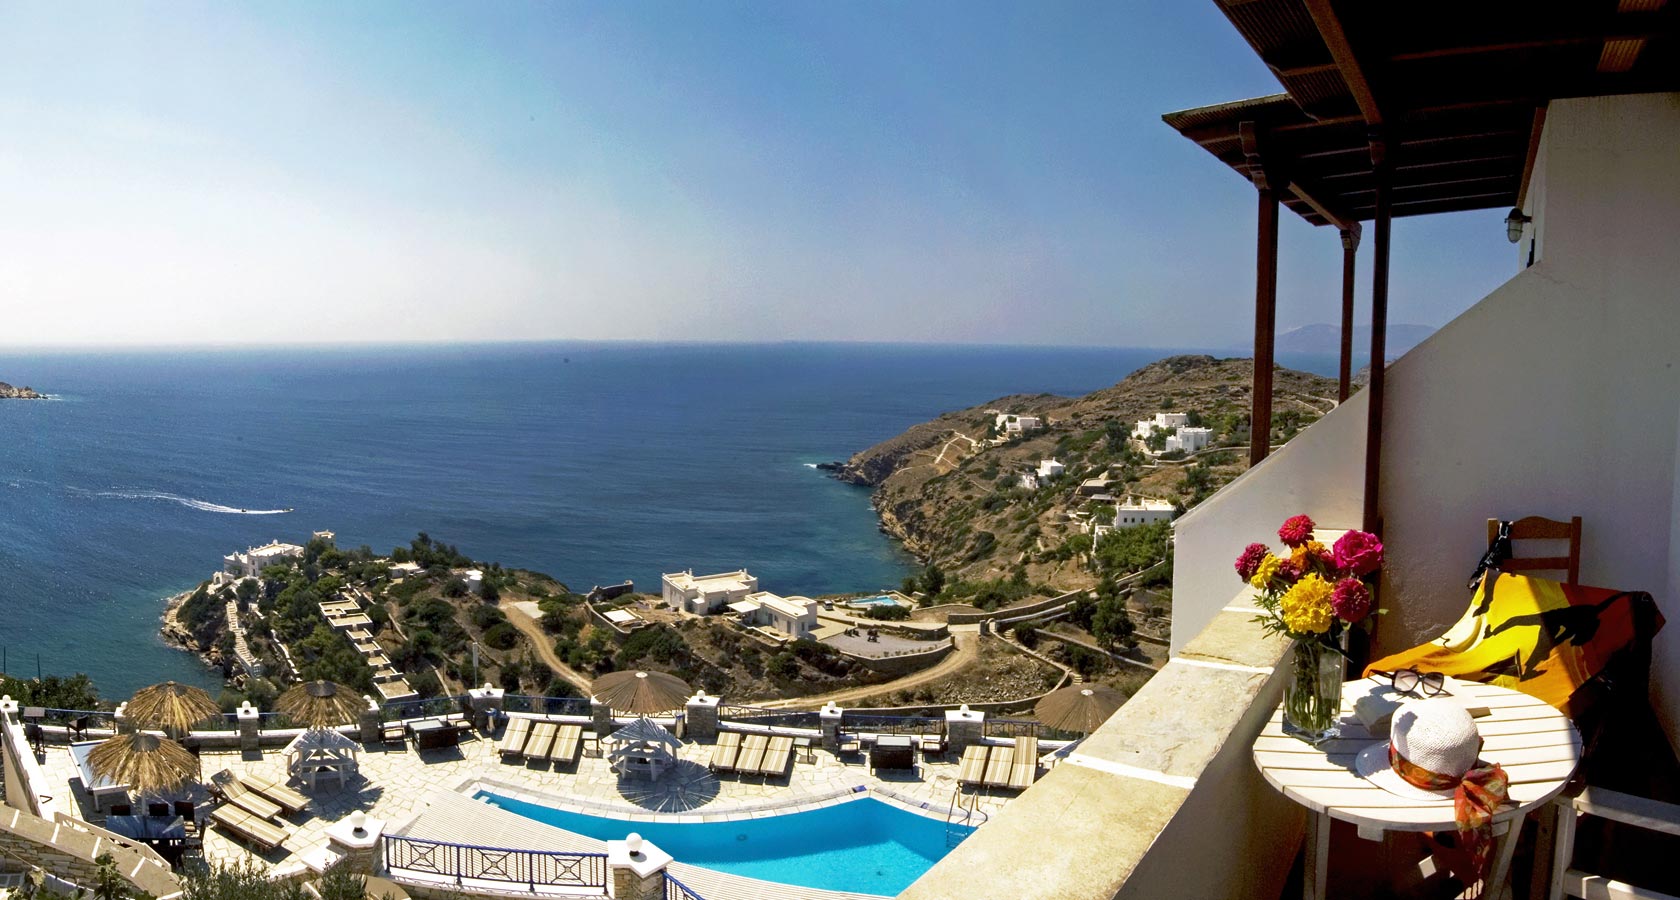 The Sea View of Hermes  in Ios island Greece - Ios Accommodation